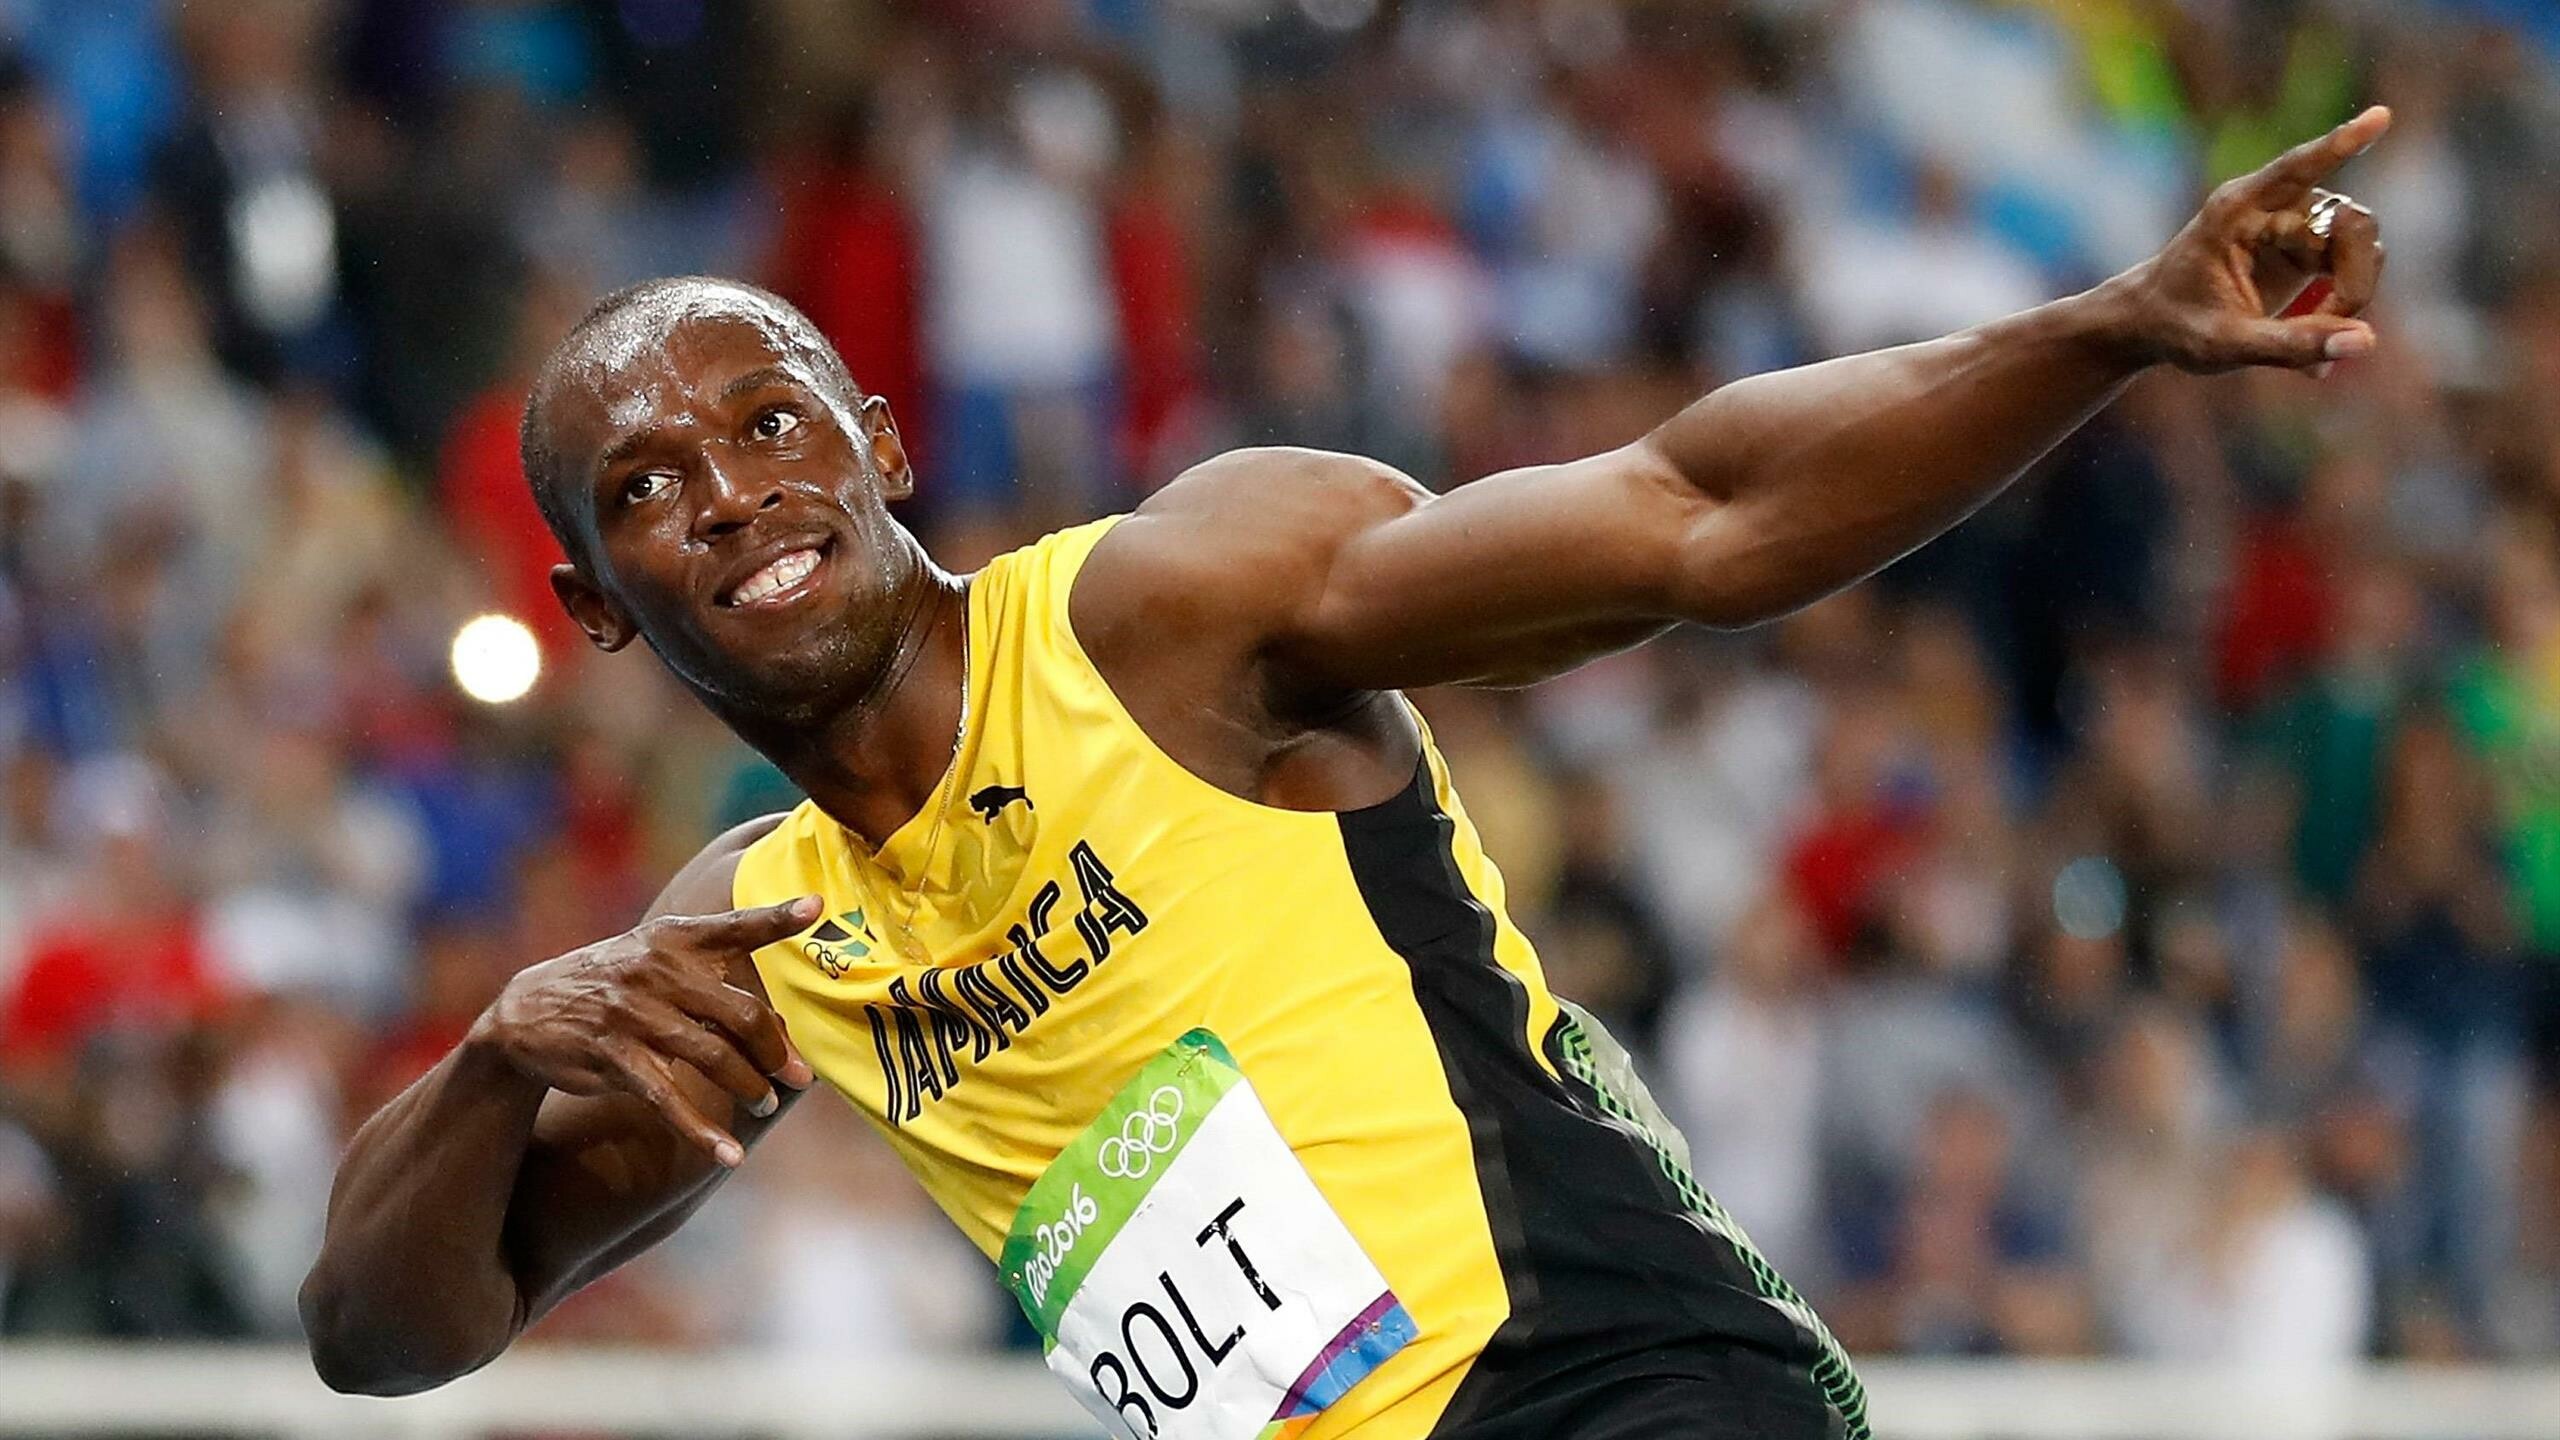 Usain Bolt: The first athlete to win four World Championship titles in the 200 m. 2560x1440 HD Background.